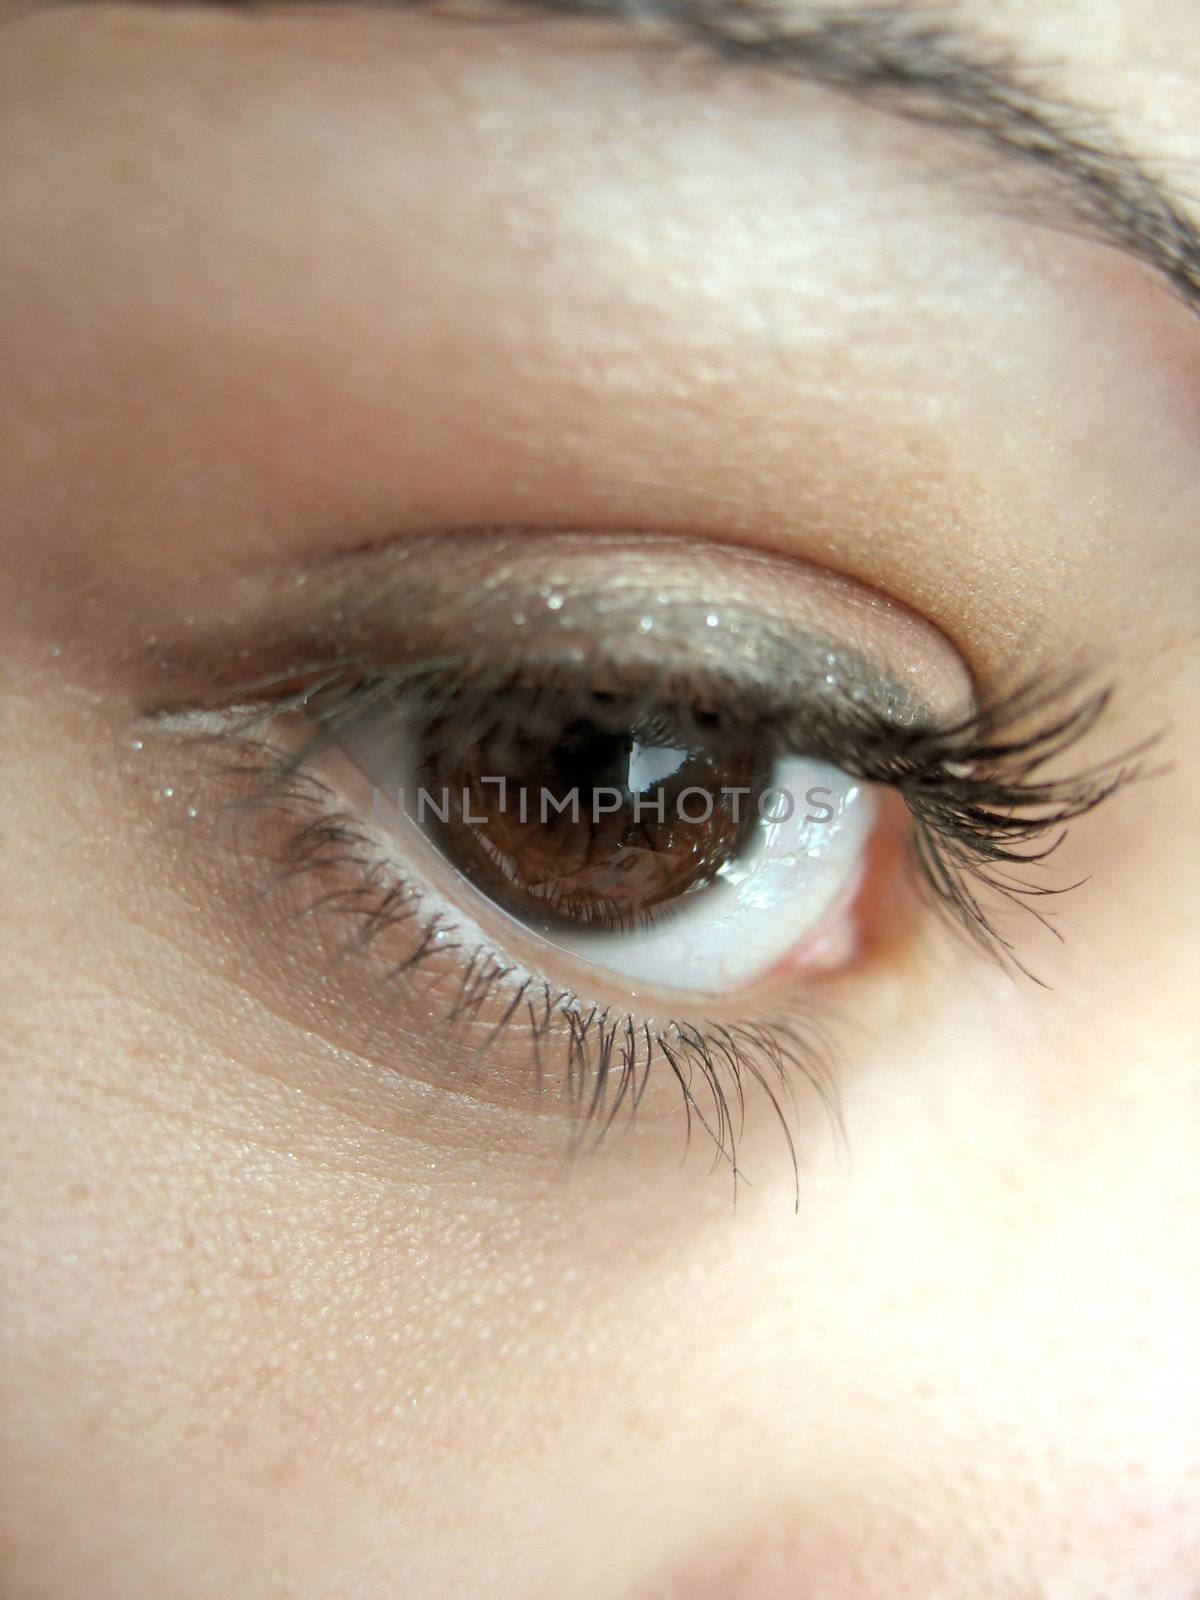 A macro shot of a pretty eye and lashes - shallow depth of field.